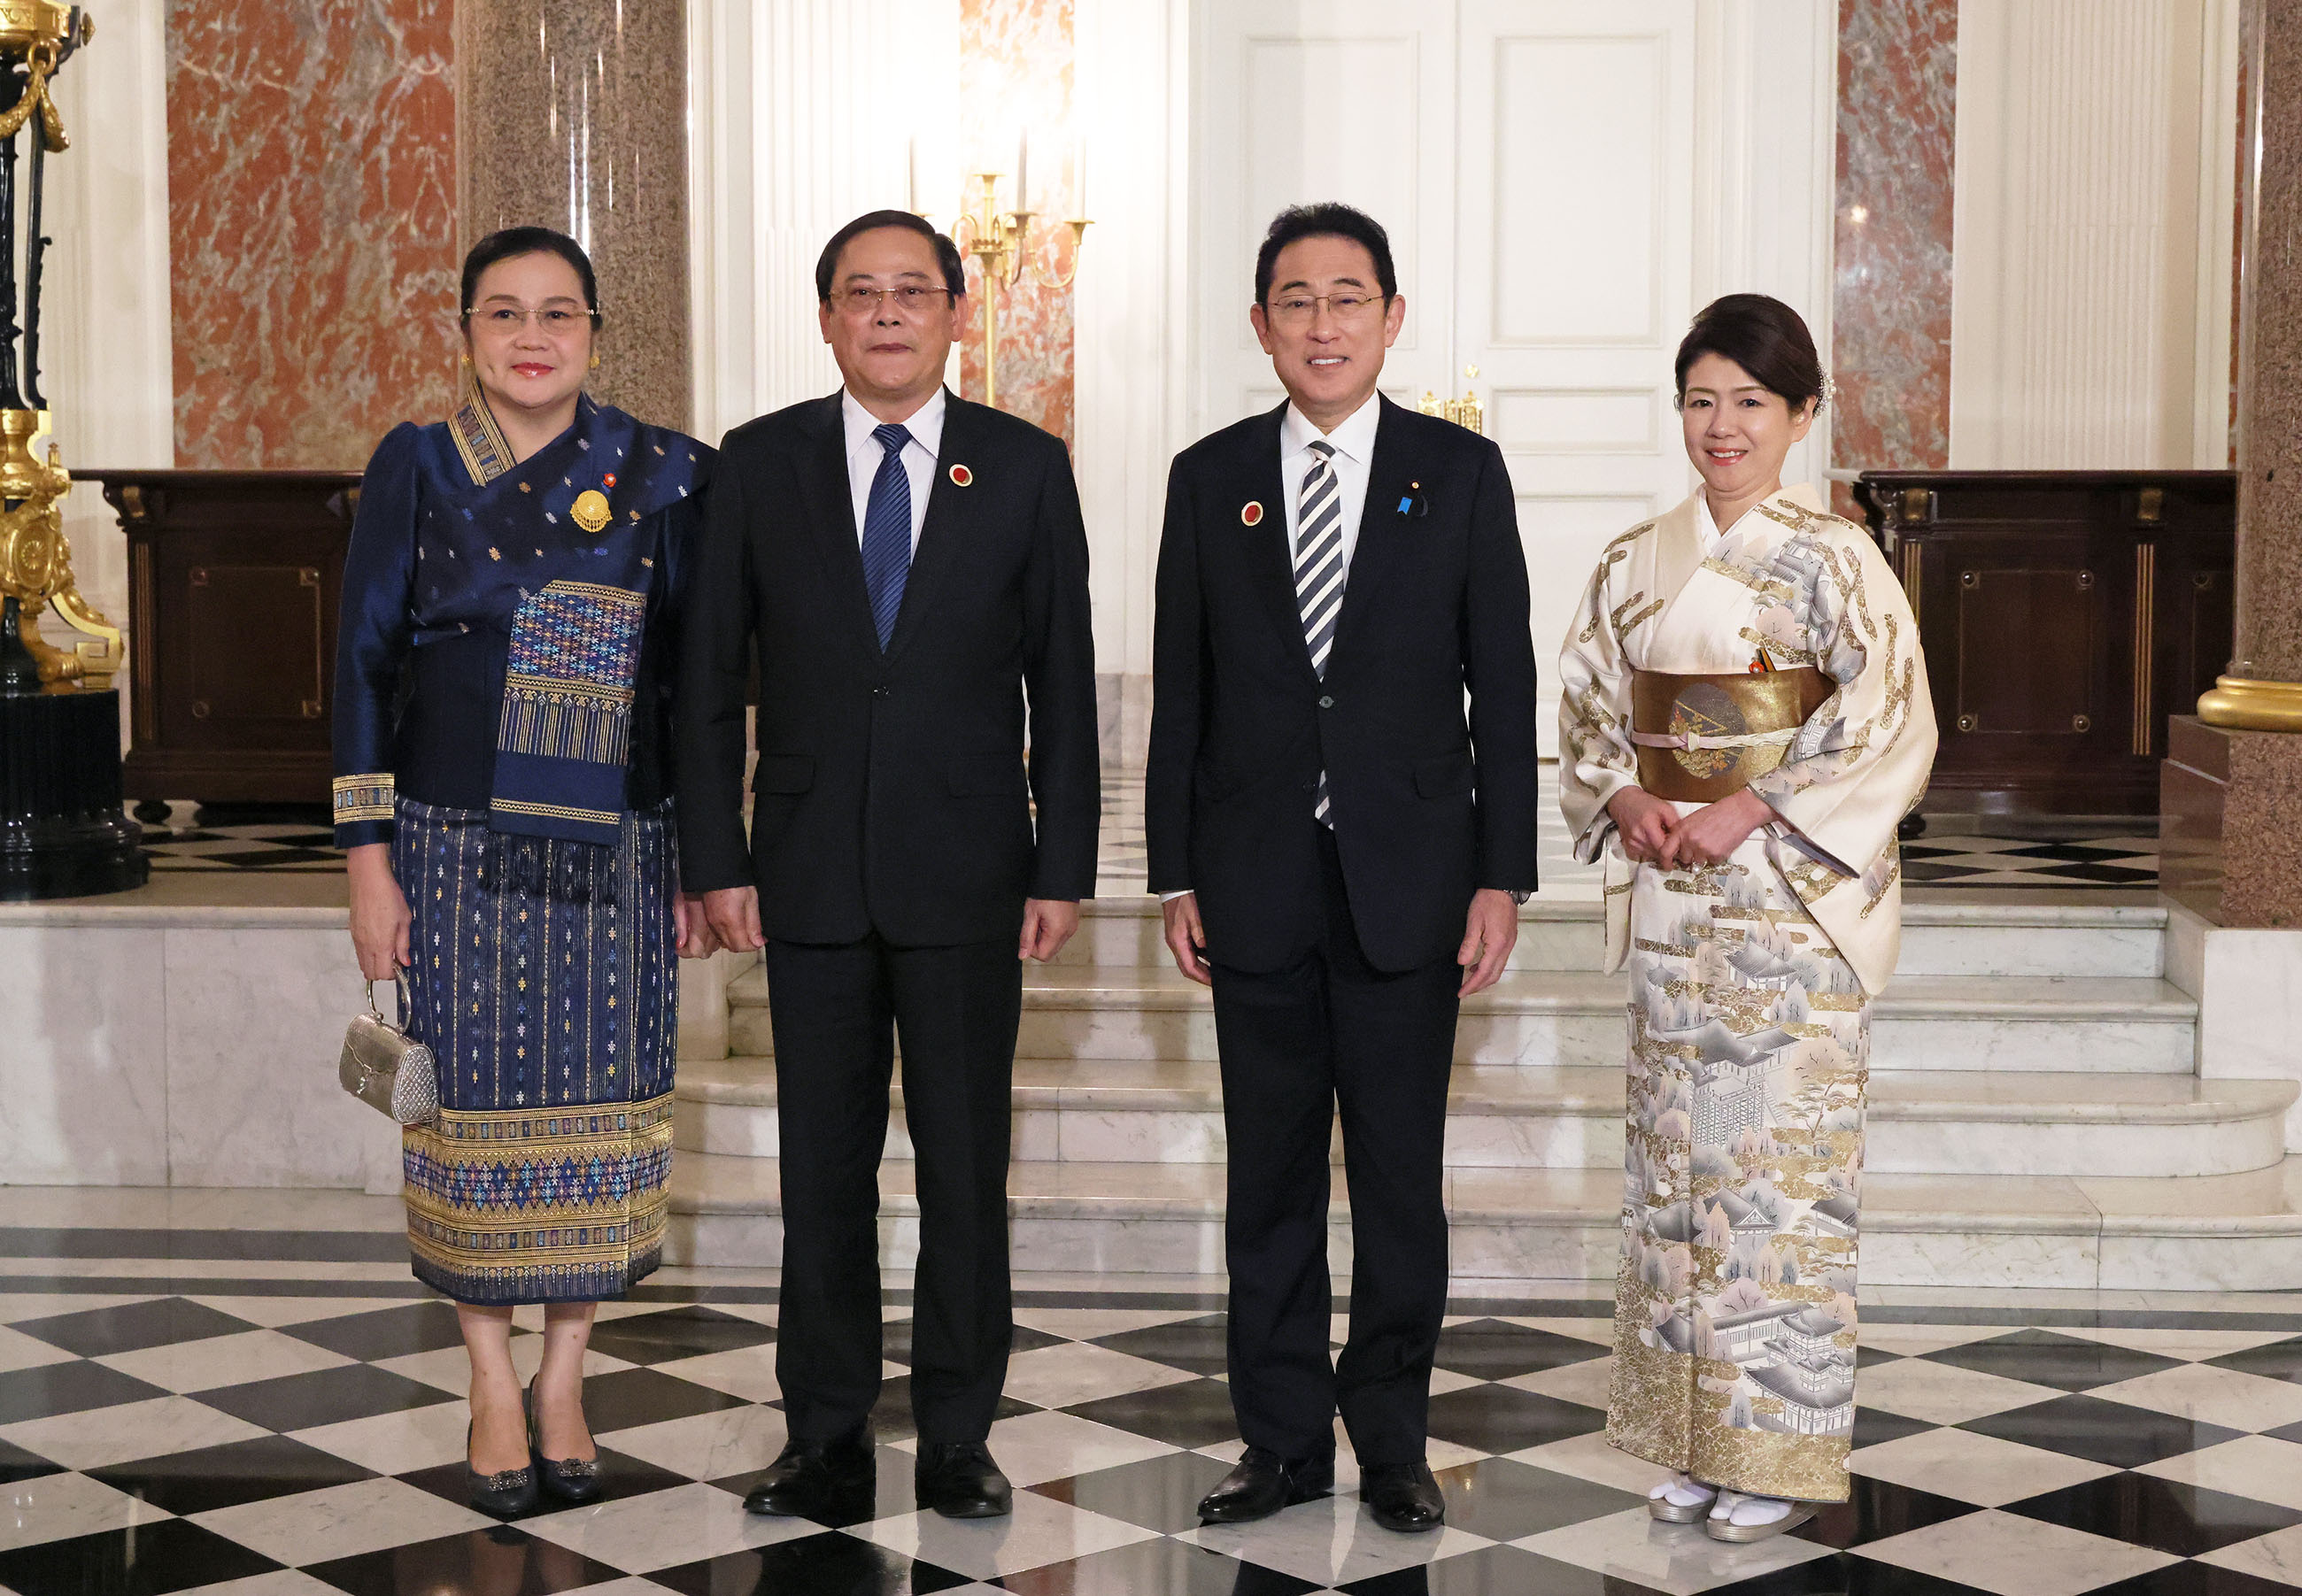 Prime Minister Kishida welcoming Prime Minister Sonexay of the Lao People’s Democratic Republic and spouse